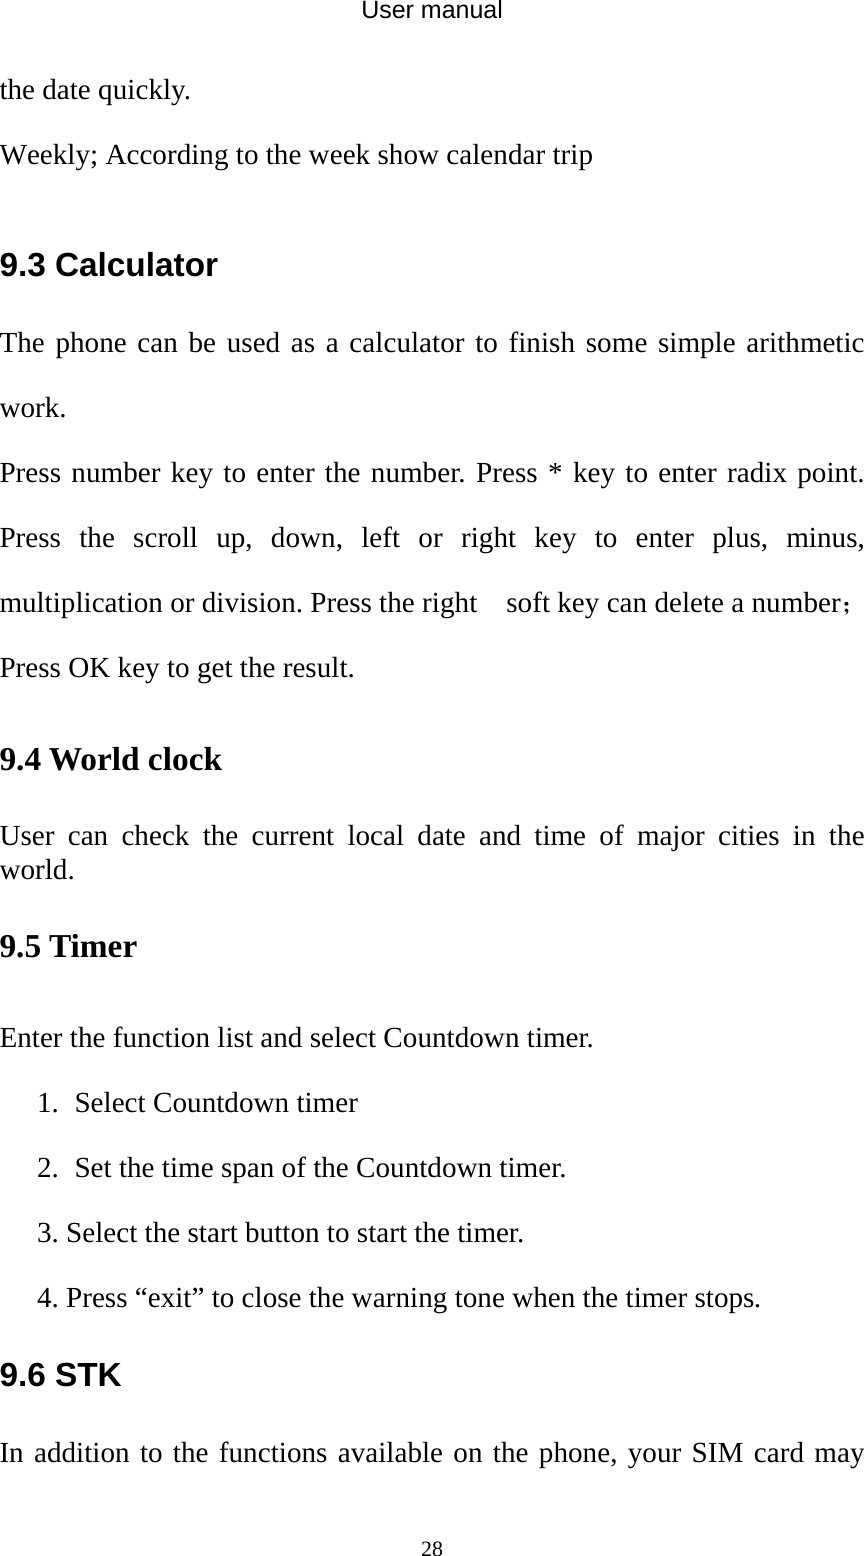 User manual  28the date quickly. Weekly; According to the week show calendar trip  9.3 Calculator The phone can be used as a calculator to finish some simple arithmetic work. Press number key to enter the number. Press * key to enter radix point. Press the scroll up, down, left or right key to enter plus, minus, multiplication or division. Press the right    soft key can delete a number；Press OK key to get the result. 9.4 World clock User can check the current local date and time of major cities in the world. 9.5 Timer Enter the function list and select Countdown timer. 1. Select Countdown timer   2. Set the time span of the Countdown timer. 3. Select the start button to start the timer. 4. Press “exit” to close the warning tone when the timer stops. 9.6 STK In addition to the functions available on the phone, your SIM card may 